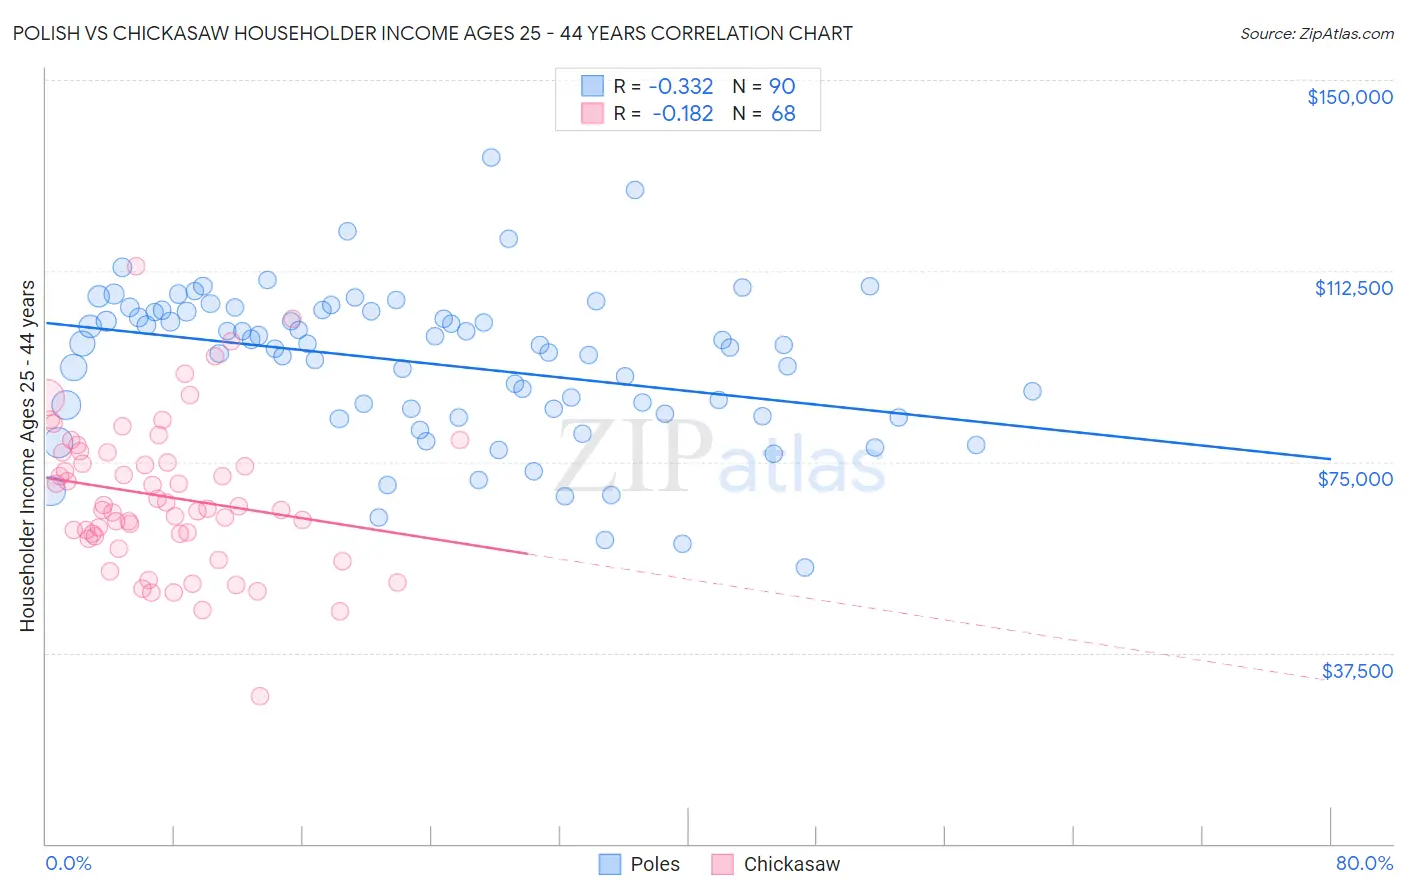 Polish vs Chickasaw Householder Income Ages 25 - 44 years